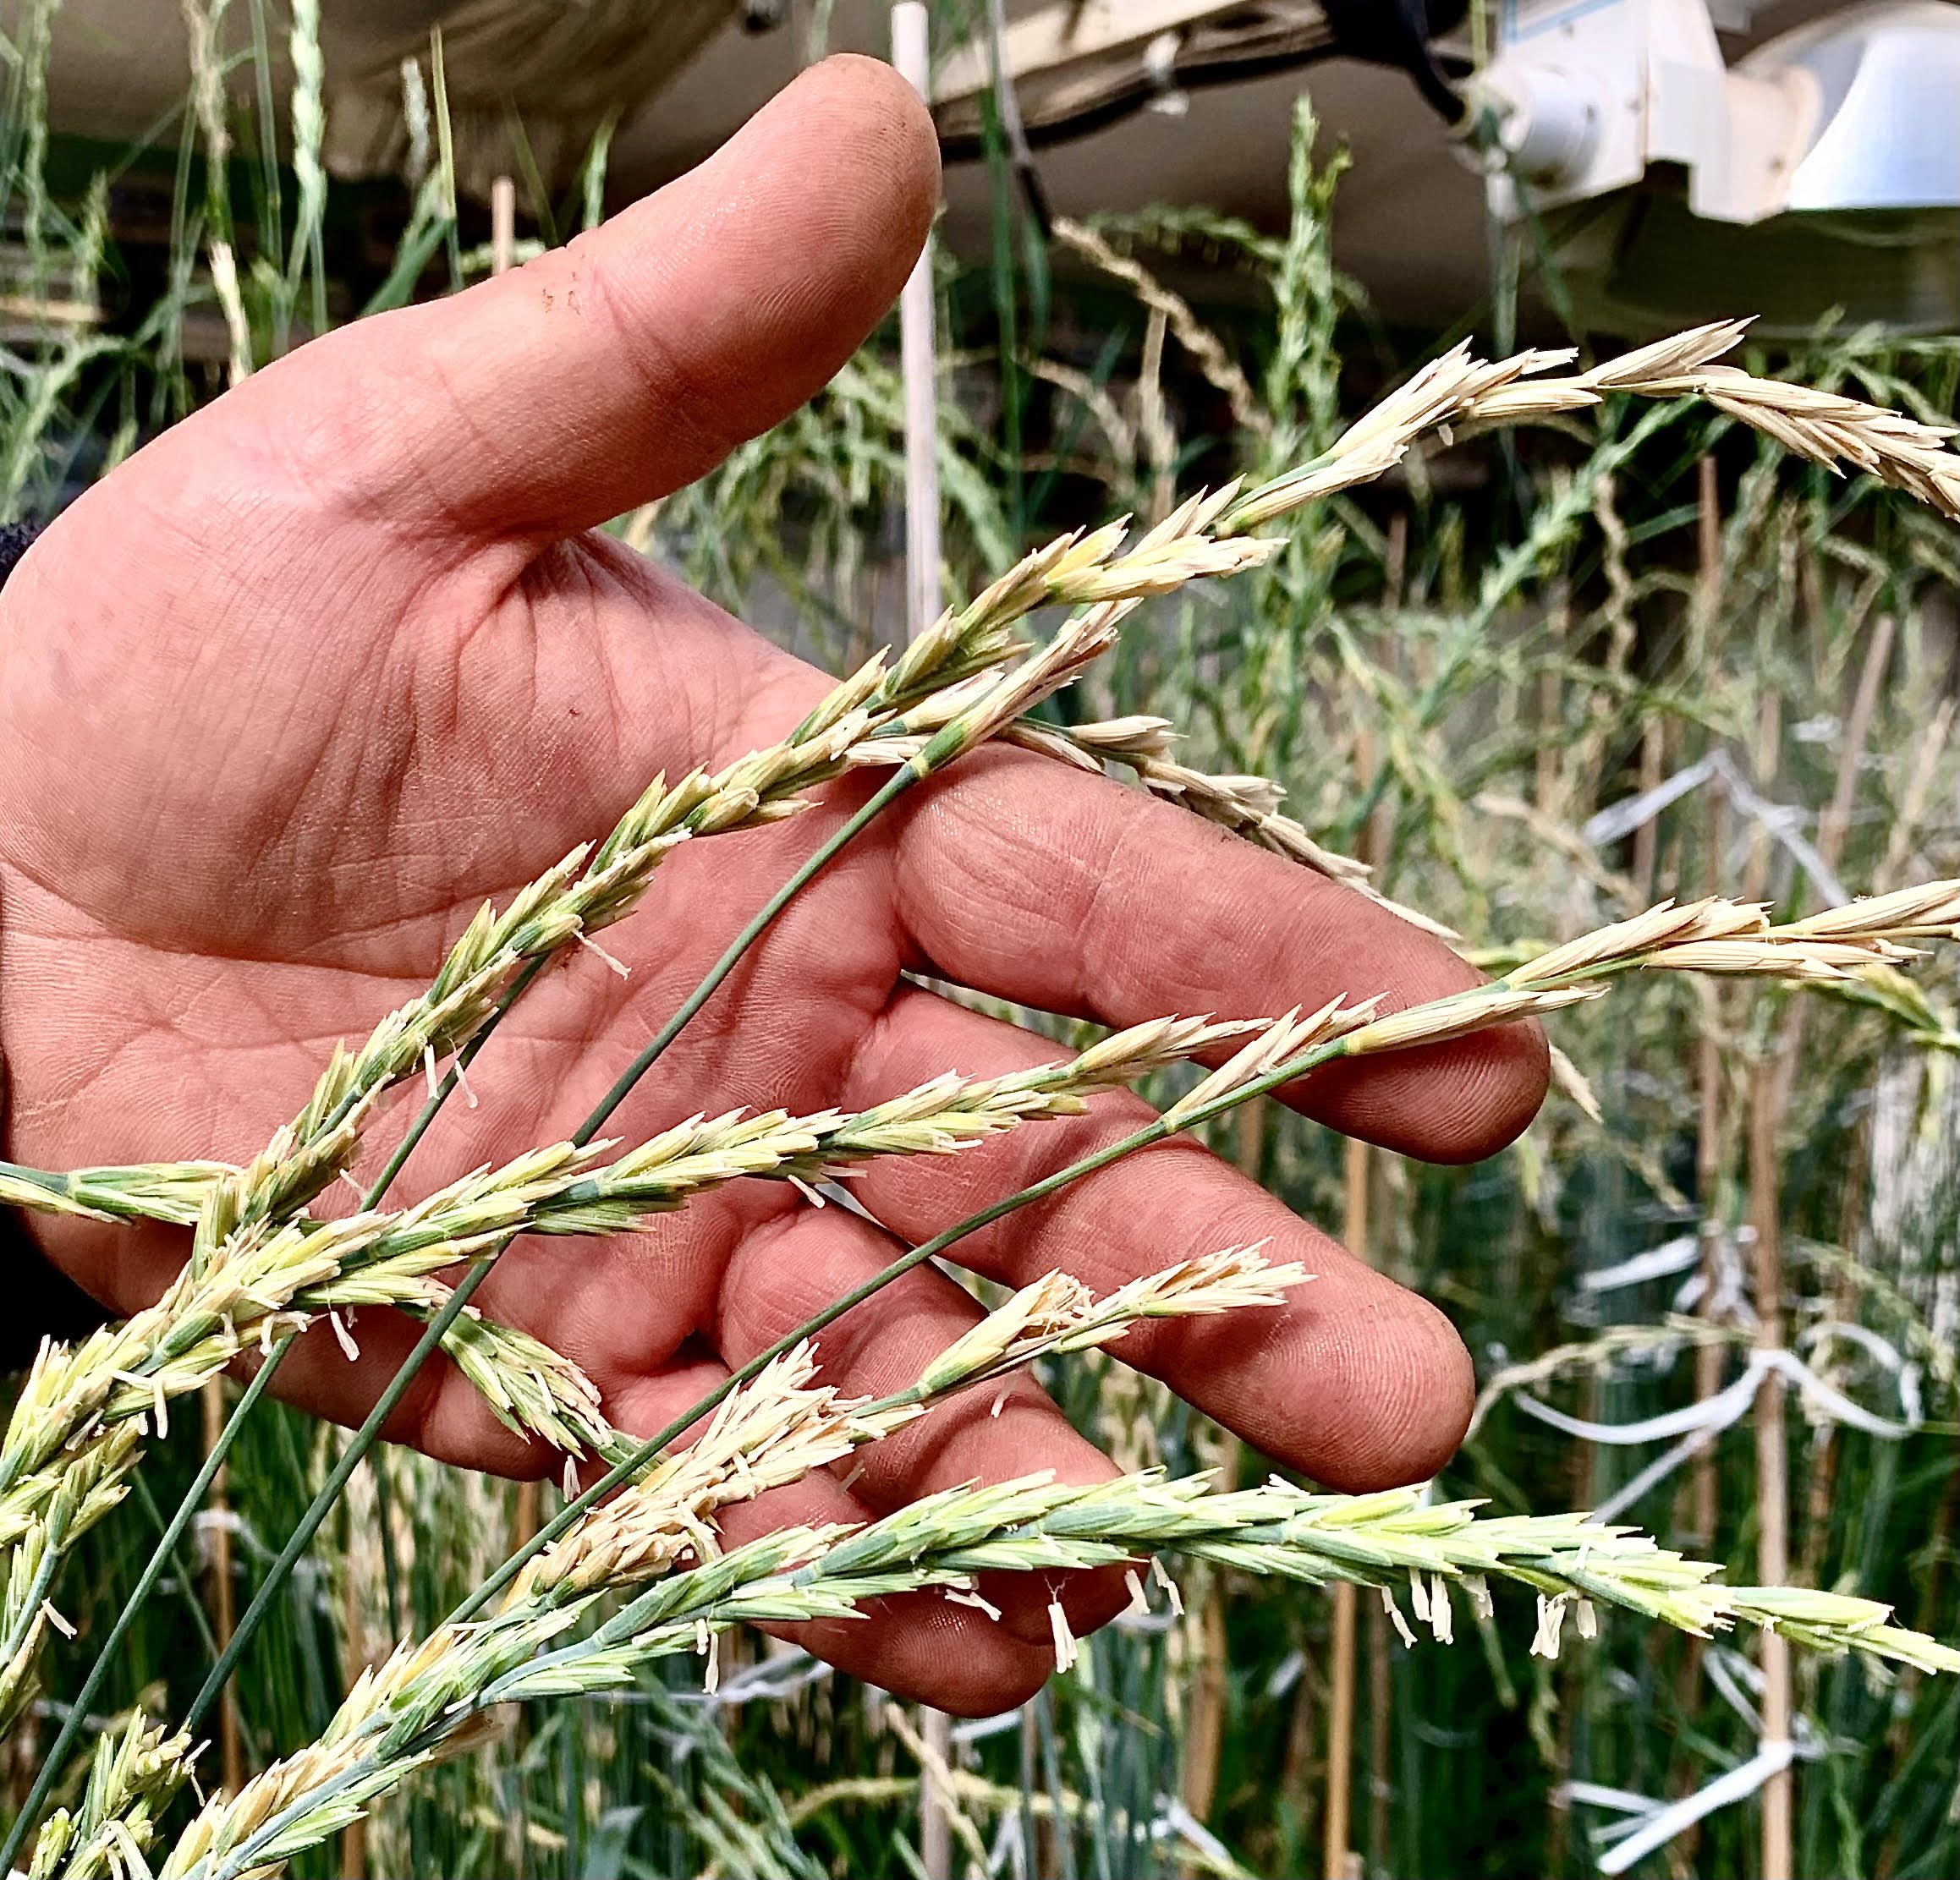 A sample of Kernza raised in a greenhouse at The Land Institute near Salina, Kansas, sports a different look than annual winter wheat. (Photo by Tim Unruh.)